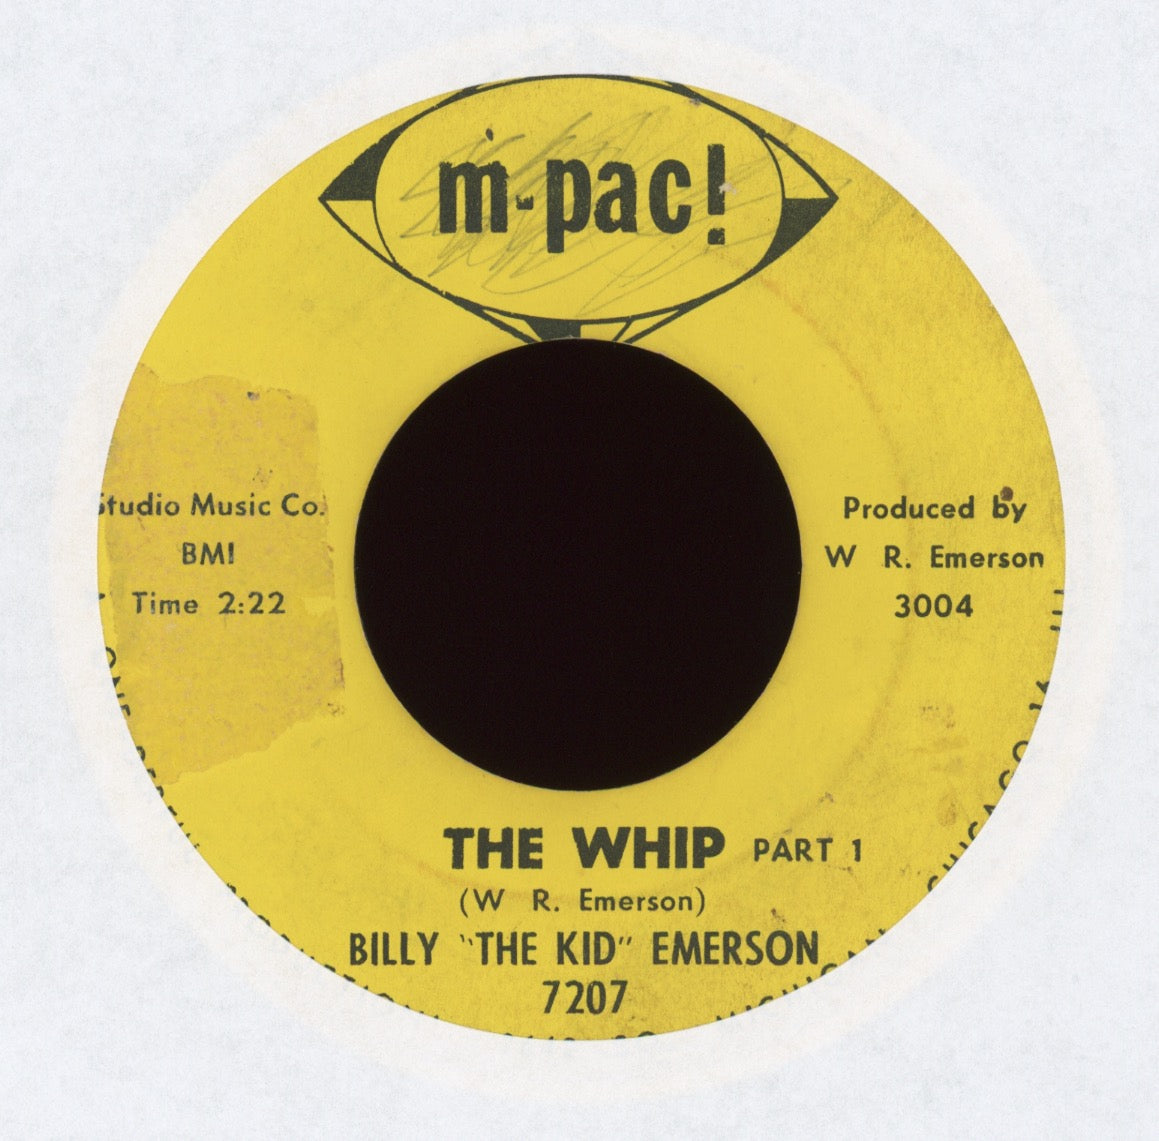 Billy Emerson - The Whip on M-Pac